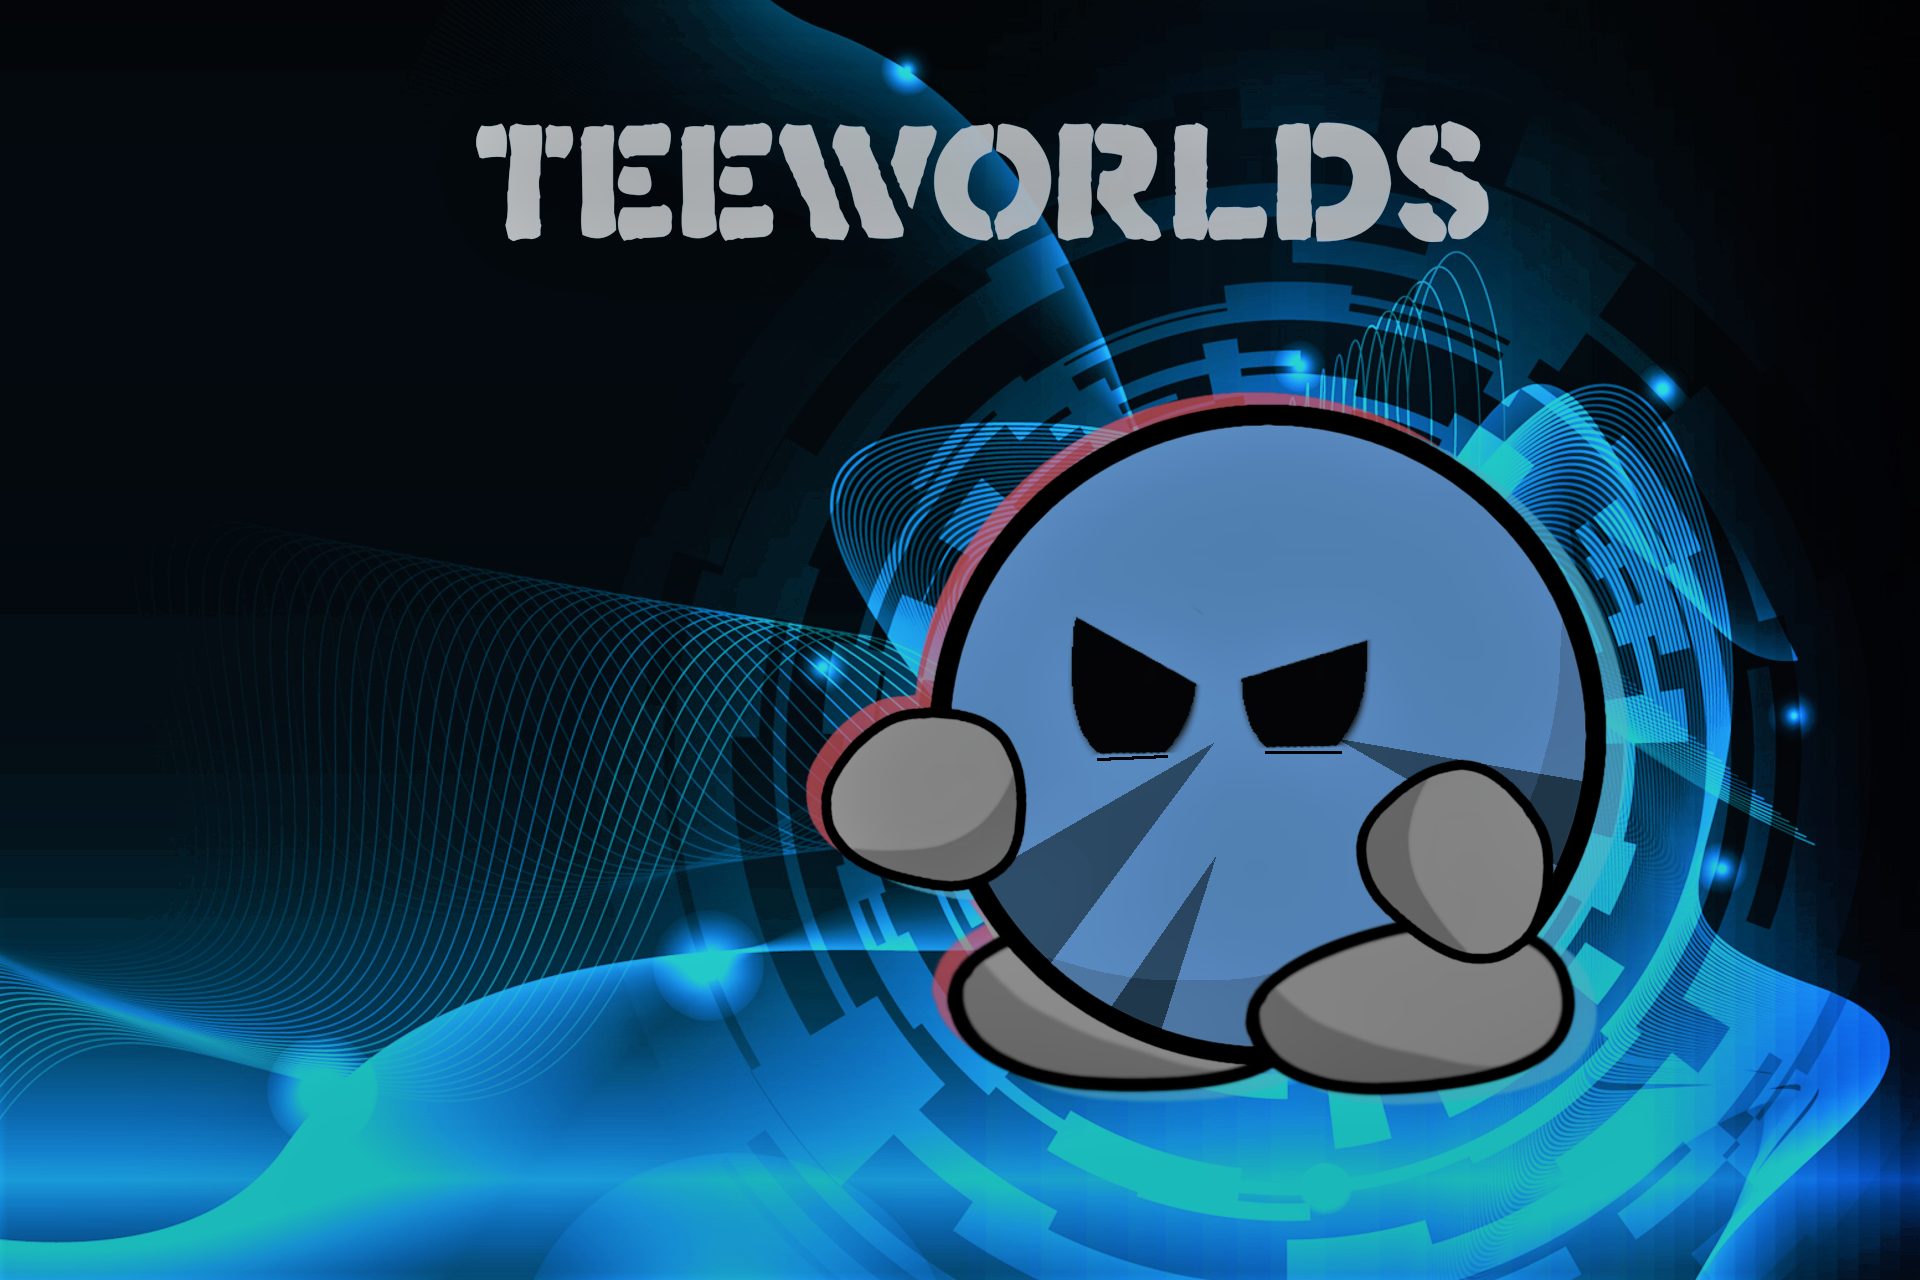 Teeworlds_jao.png